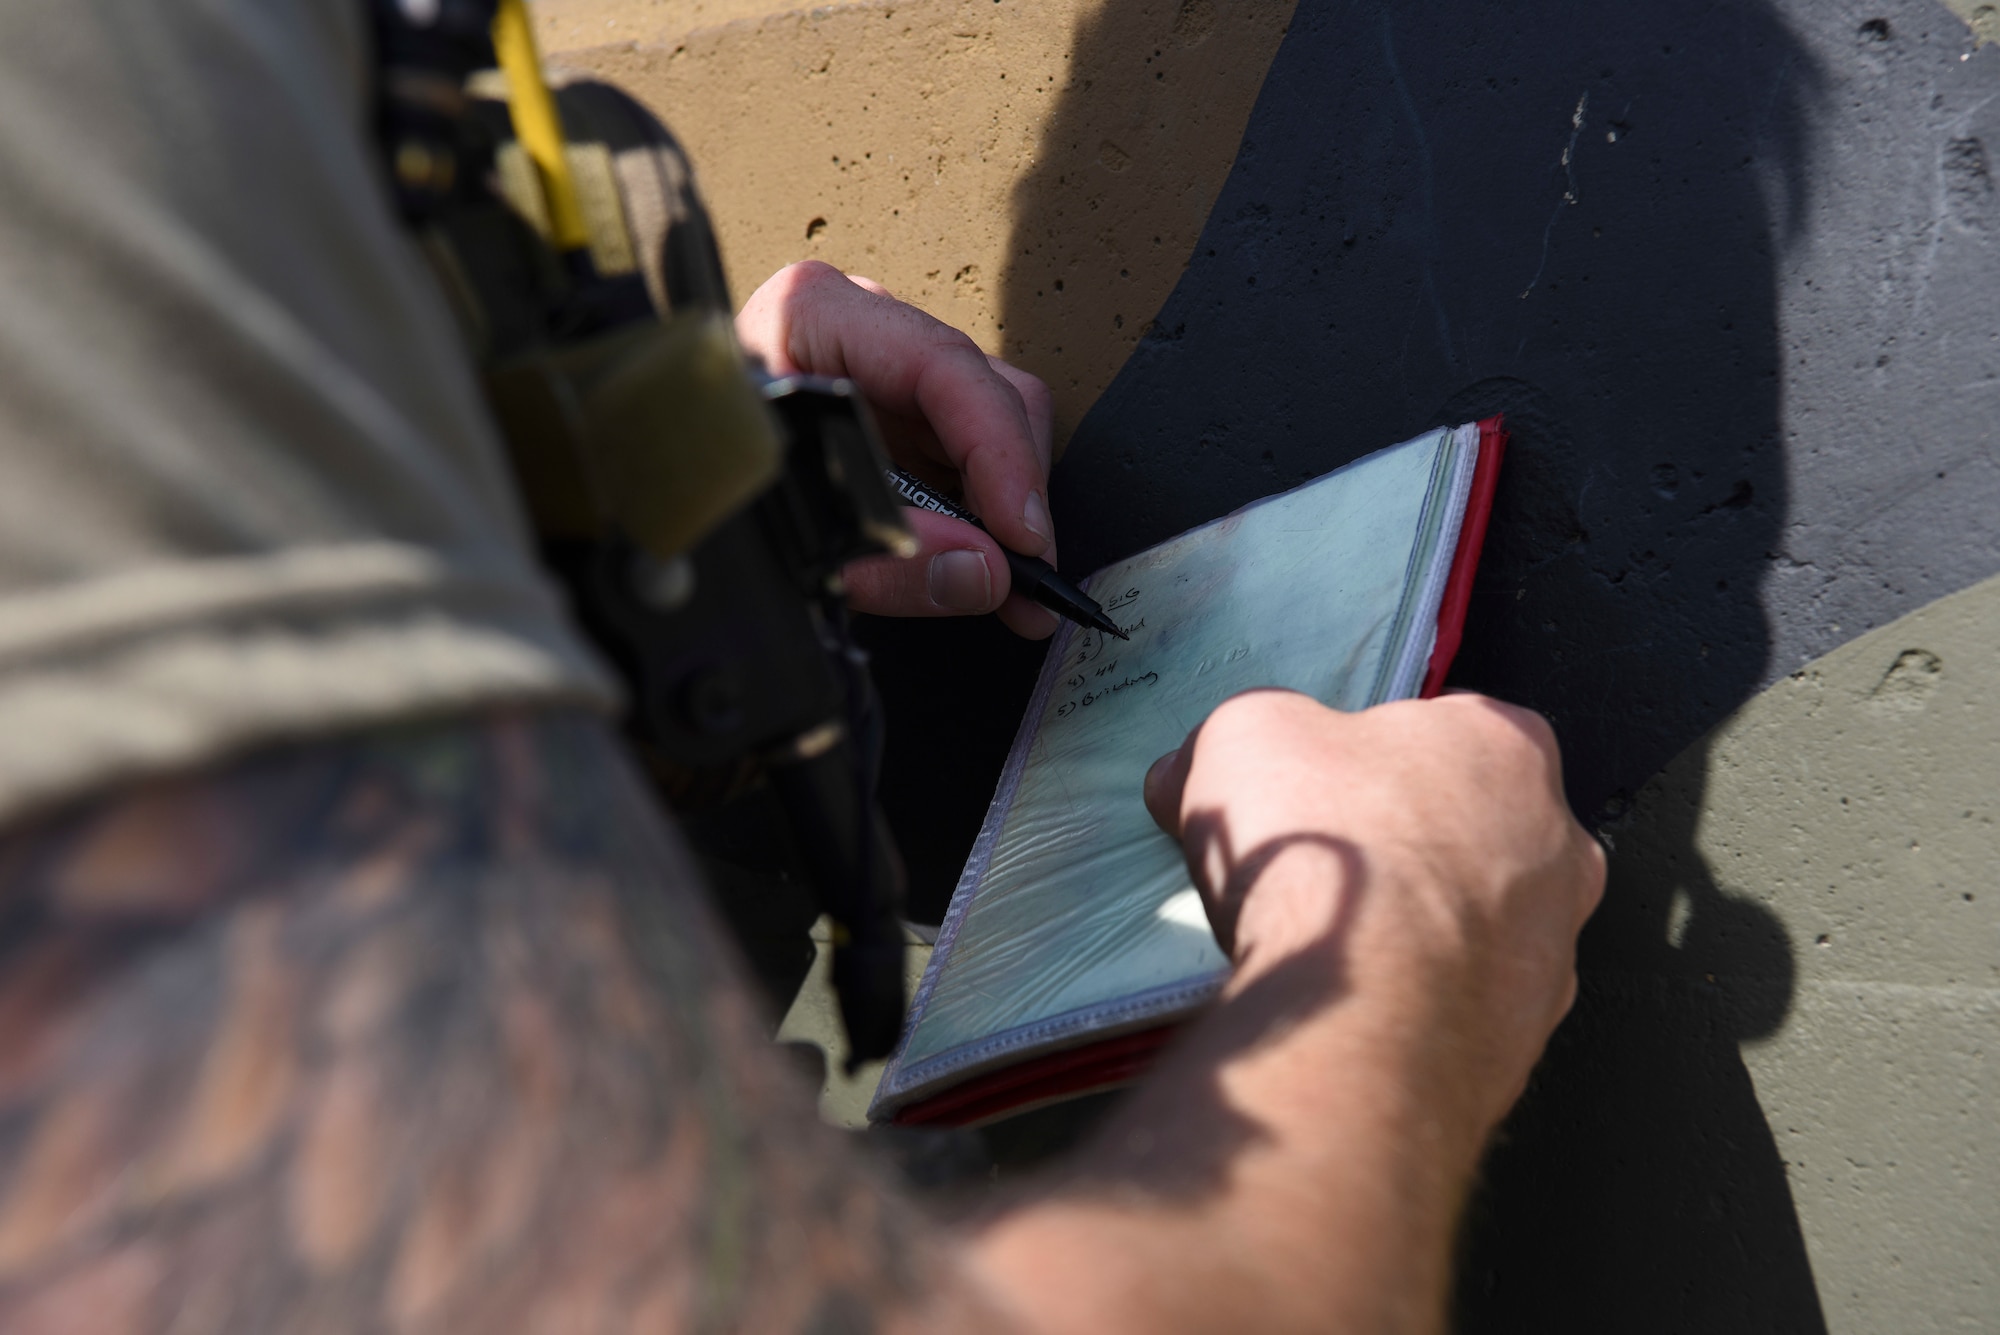 U.S. Air Force 1st Lt. Clay West, air liaison officer from the 15th Air Support Operations Squadron, Fort Stewart, Georgia, takes notes on potential targets Sept. 12, 2018 at Kunsan Air Base, Republic of Korea. Joint terminal attack controller training objectives included ensuring deconfliction of friendly artillery, helicopters, and other aircraft. (U.S. Air Force photo by Senior Airman Savannah L. Waters)